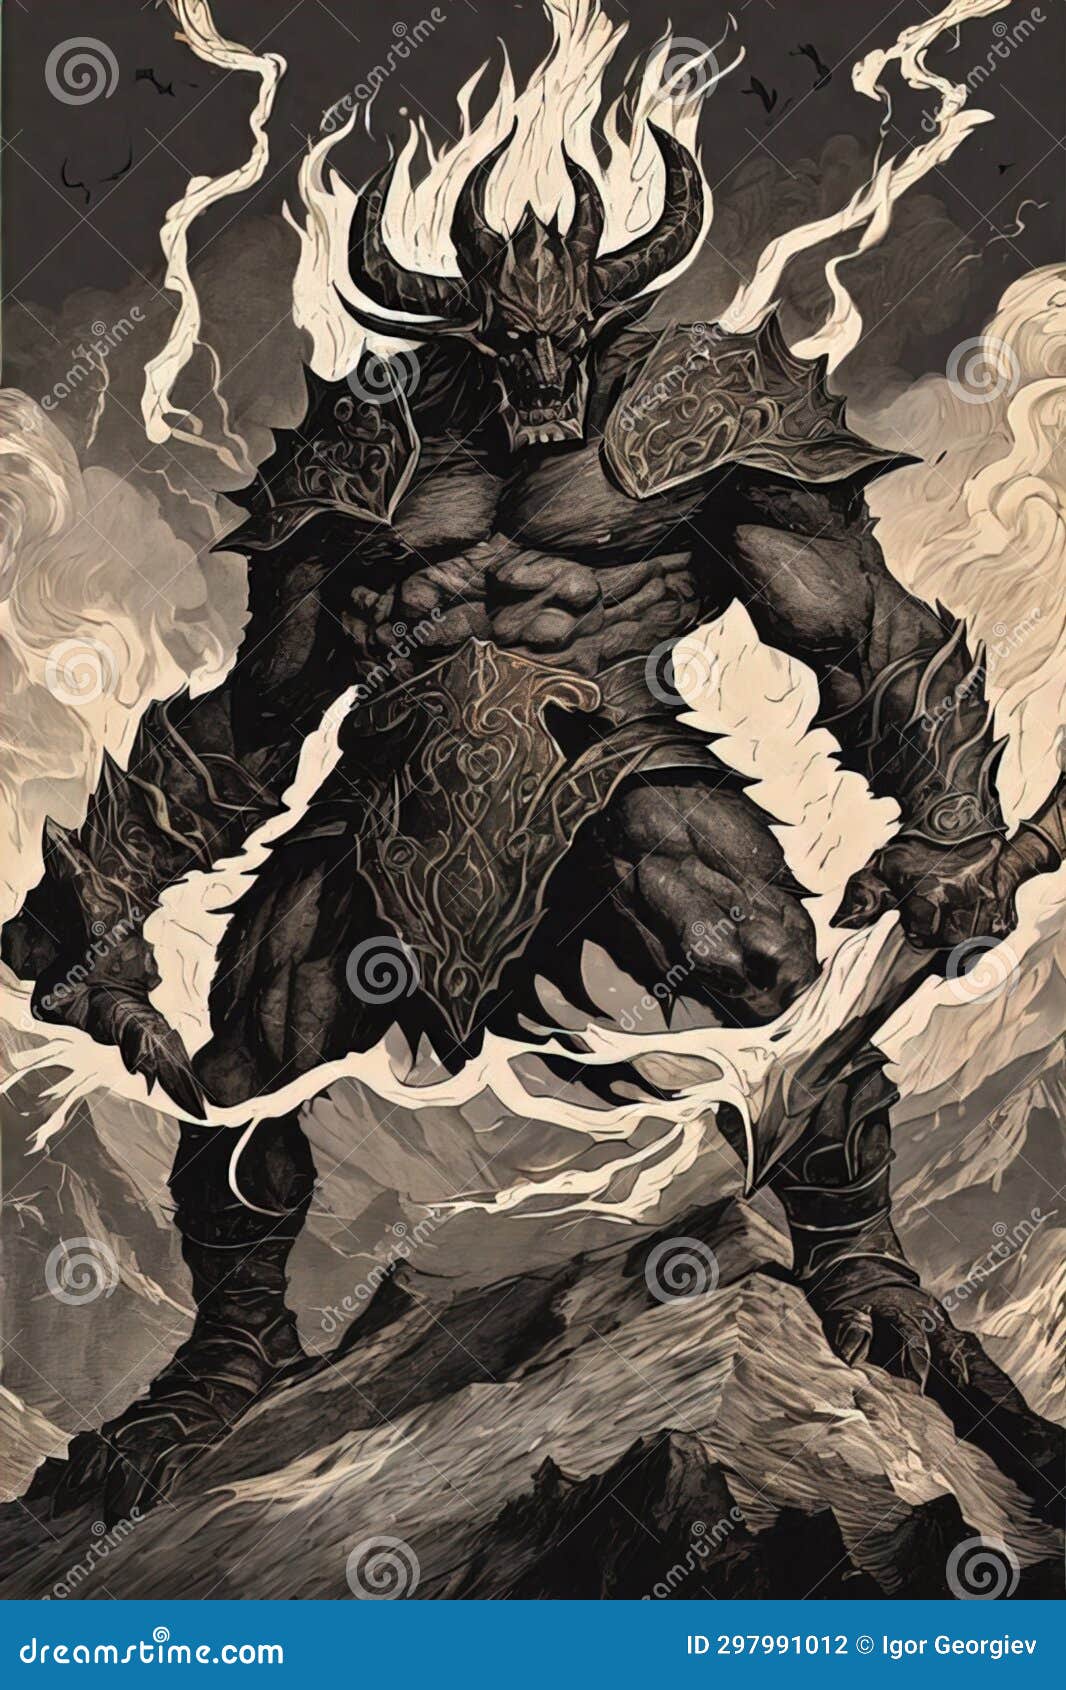 the legend of surtur a story of how a powerful fire demon sought to wreak destruction on the norse gods and their world